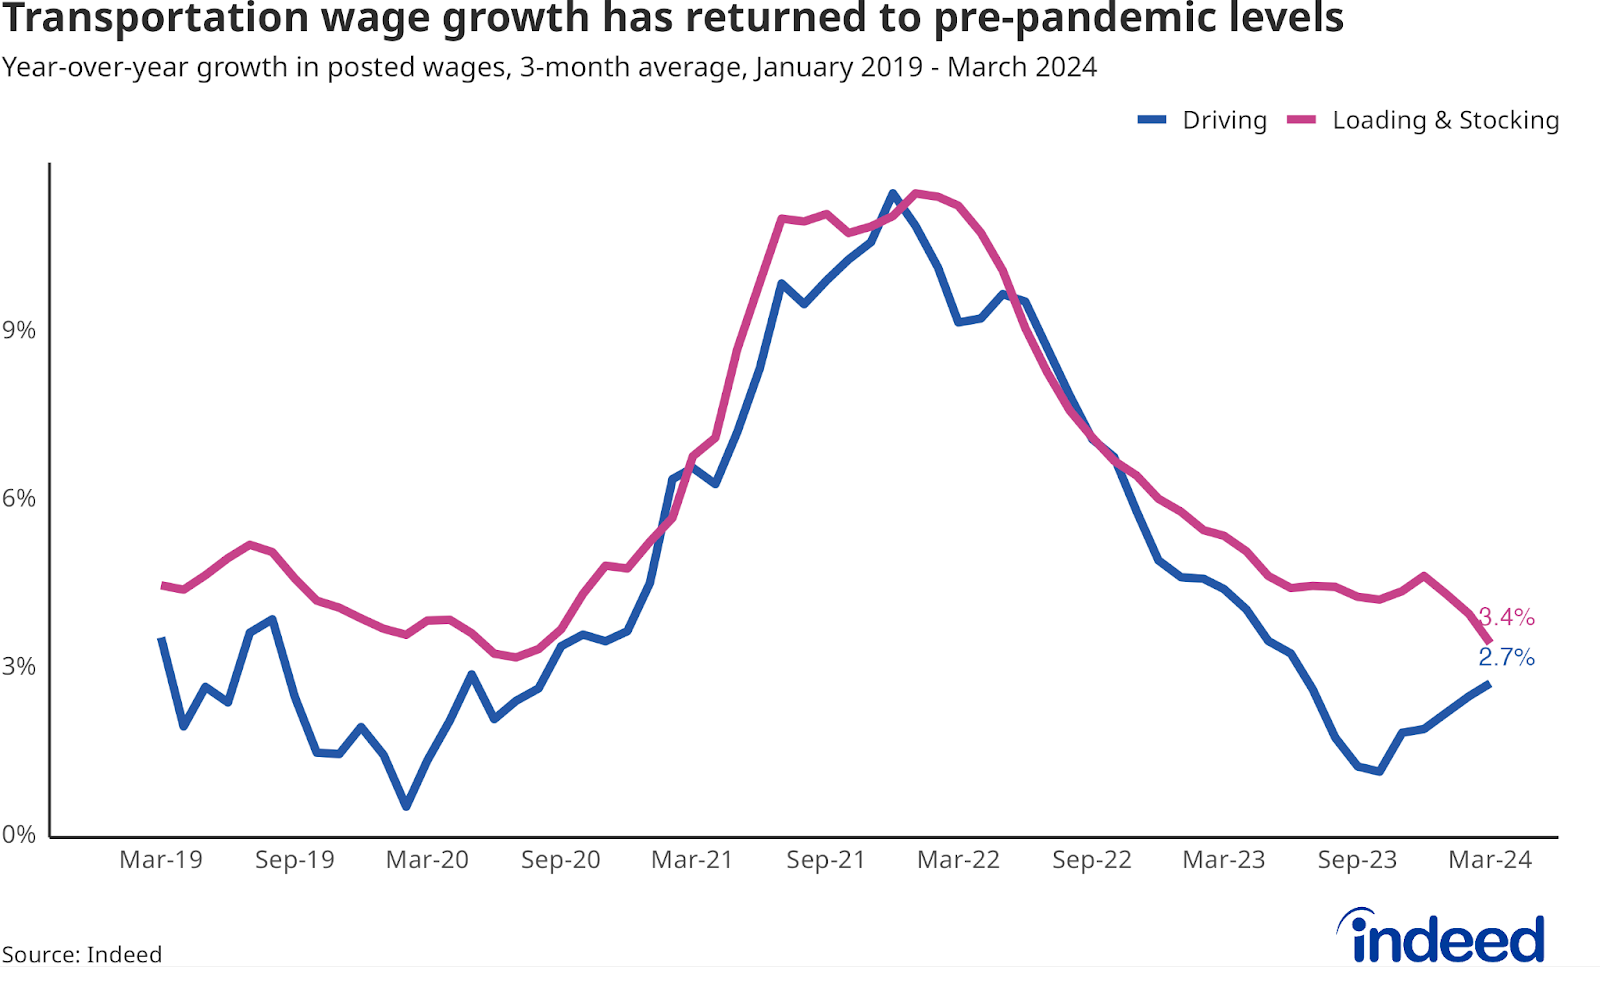 Line chart titled “Transportation wage growth has returned to pre-pandemic levels,” shows year-over-year wage growth, in %, for Driving and Loading & Stocking postings through March 2023. Wage growth in Driving postings is up 2.7% year-over-year. 